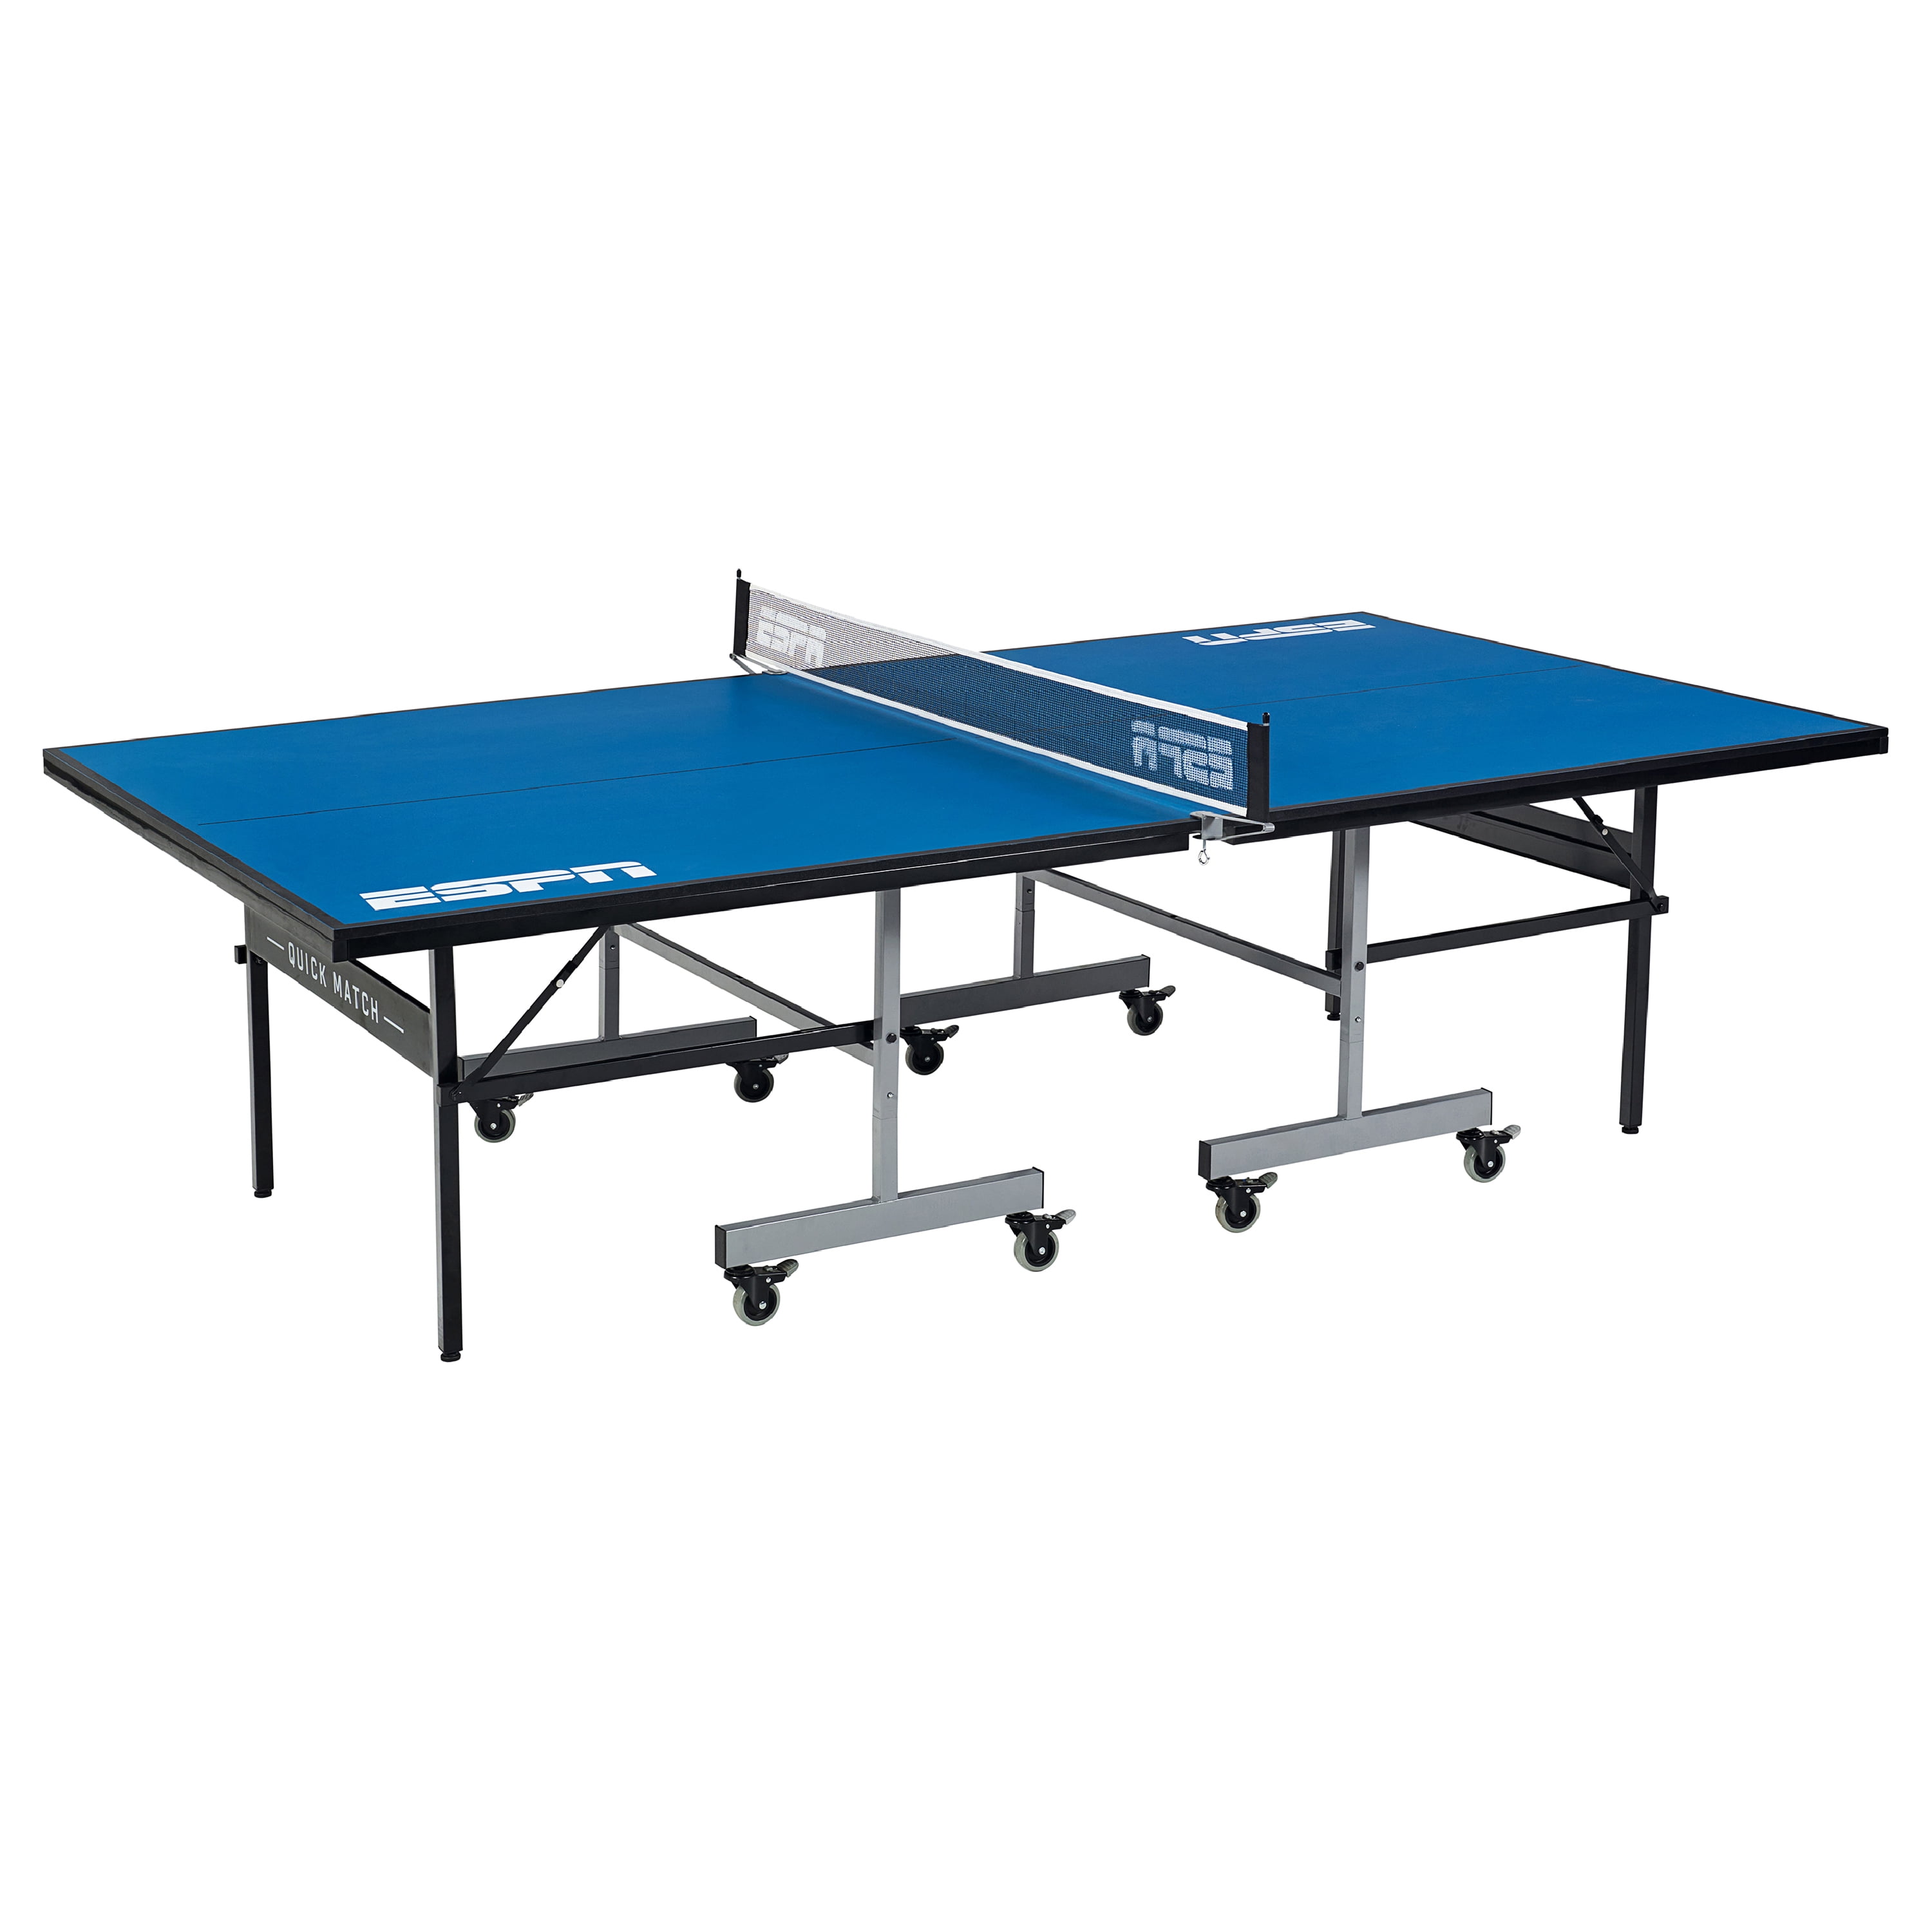 Don Indoor Outdoor Table Tennis Ping Pong Table Blue Junior Size 